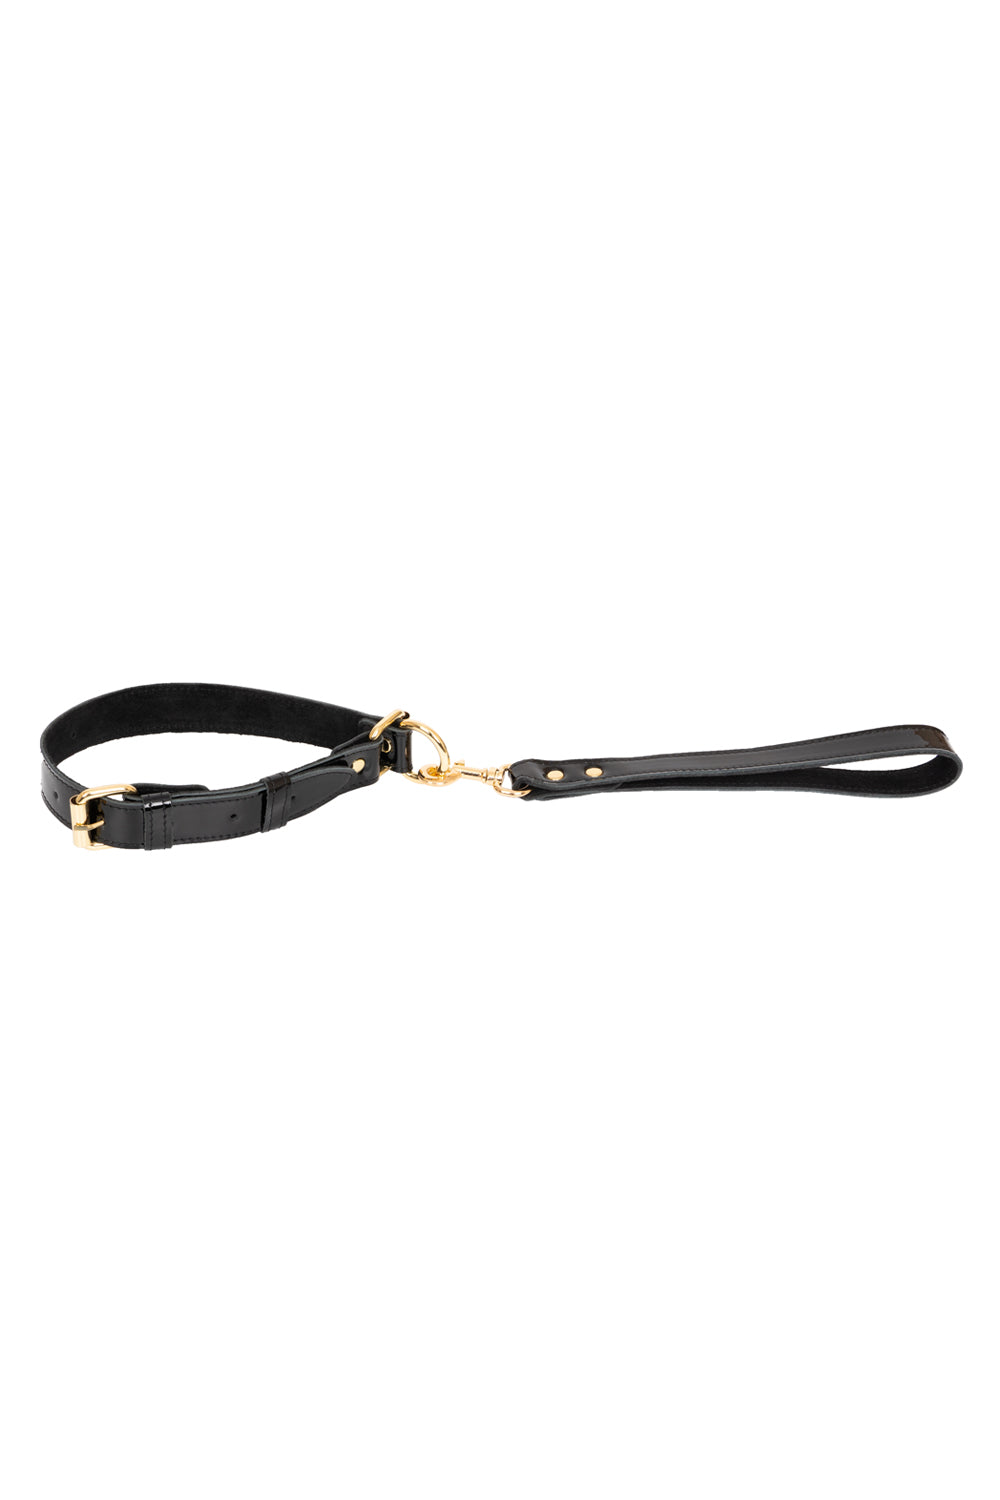 Lacquered leather self-tightening choke collar